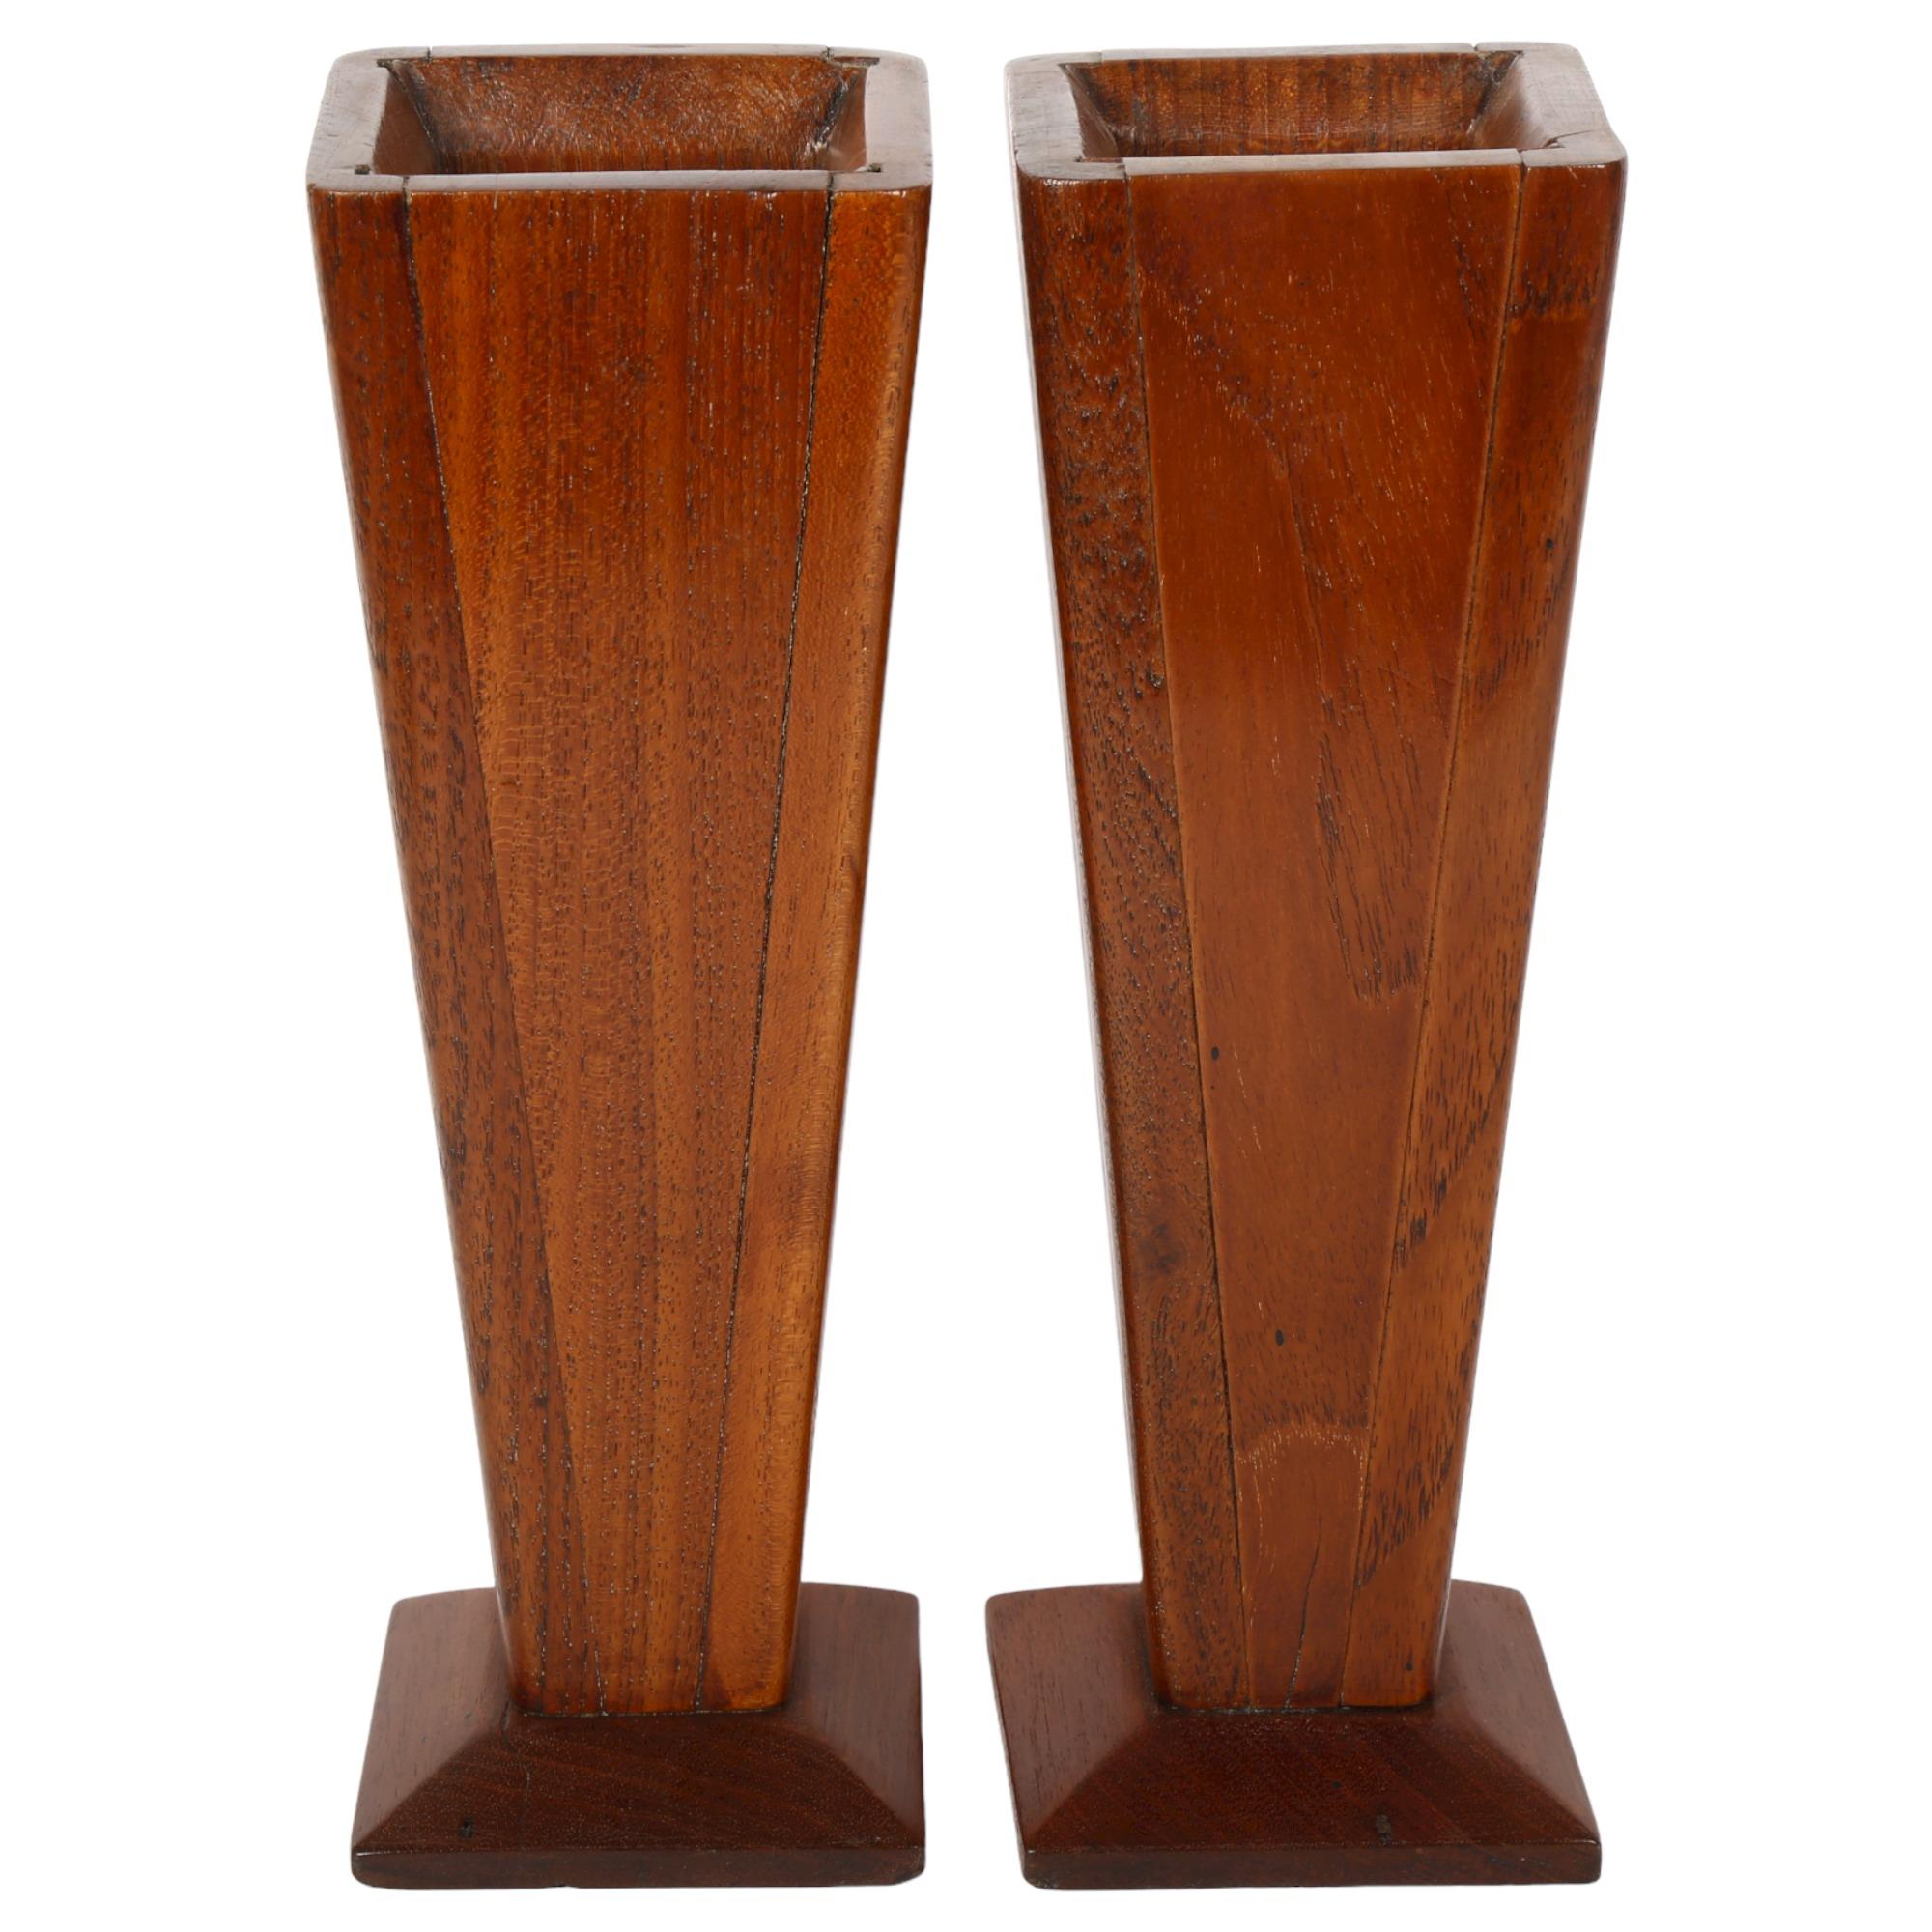 A pair of Arts and Crafts style mahogany vases of tapered form, height 27cm